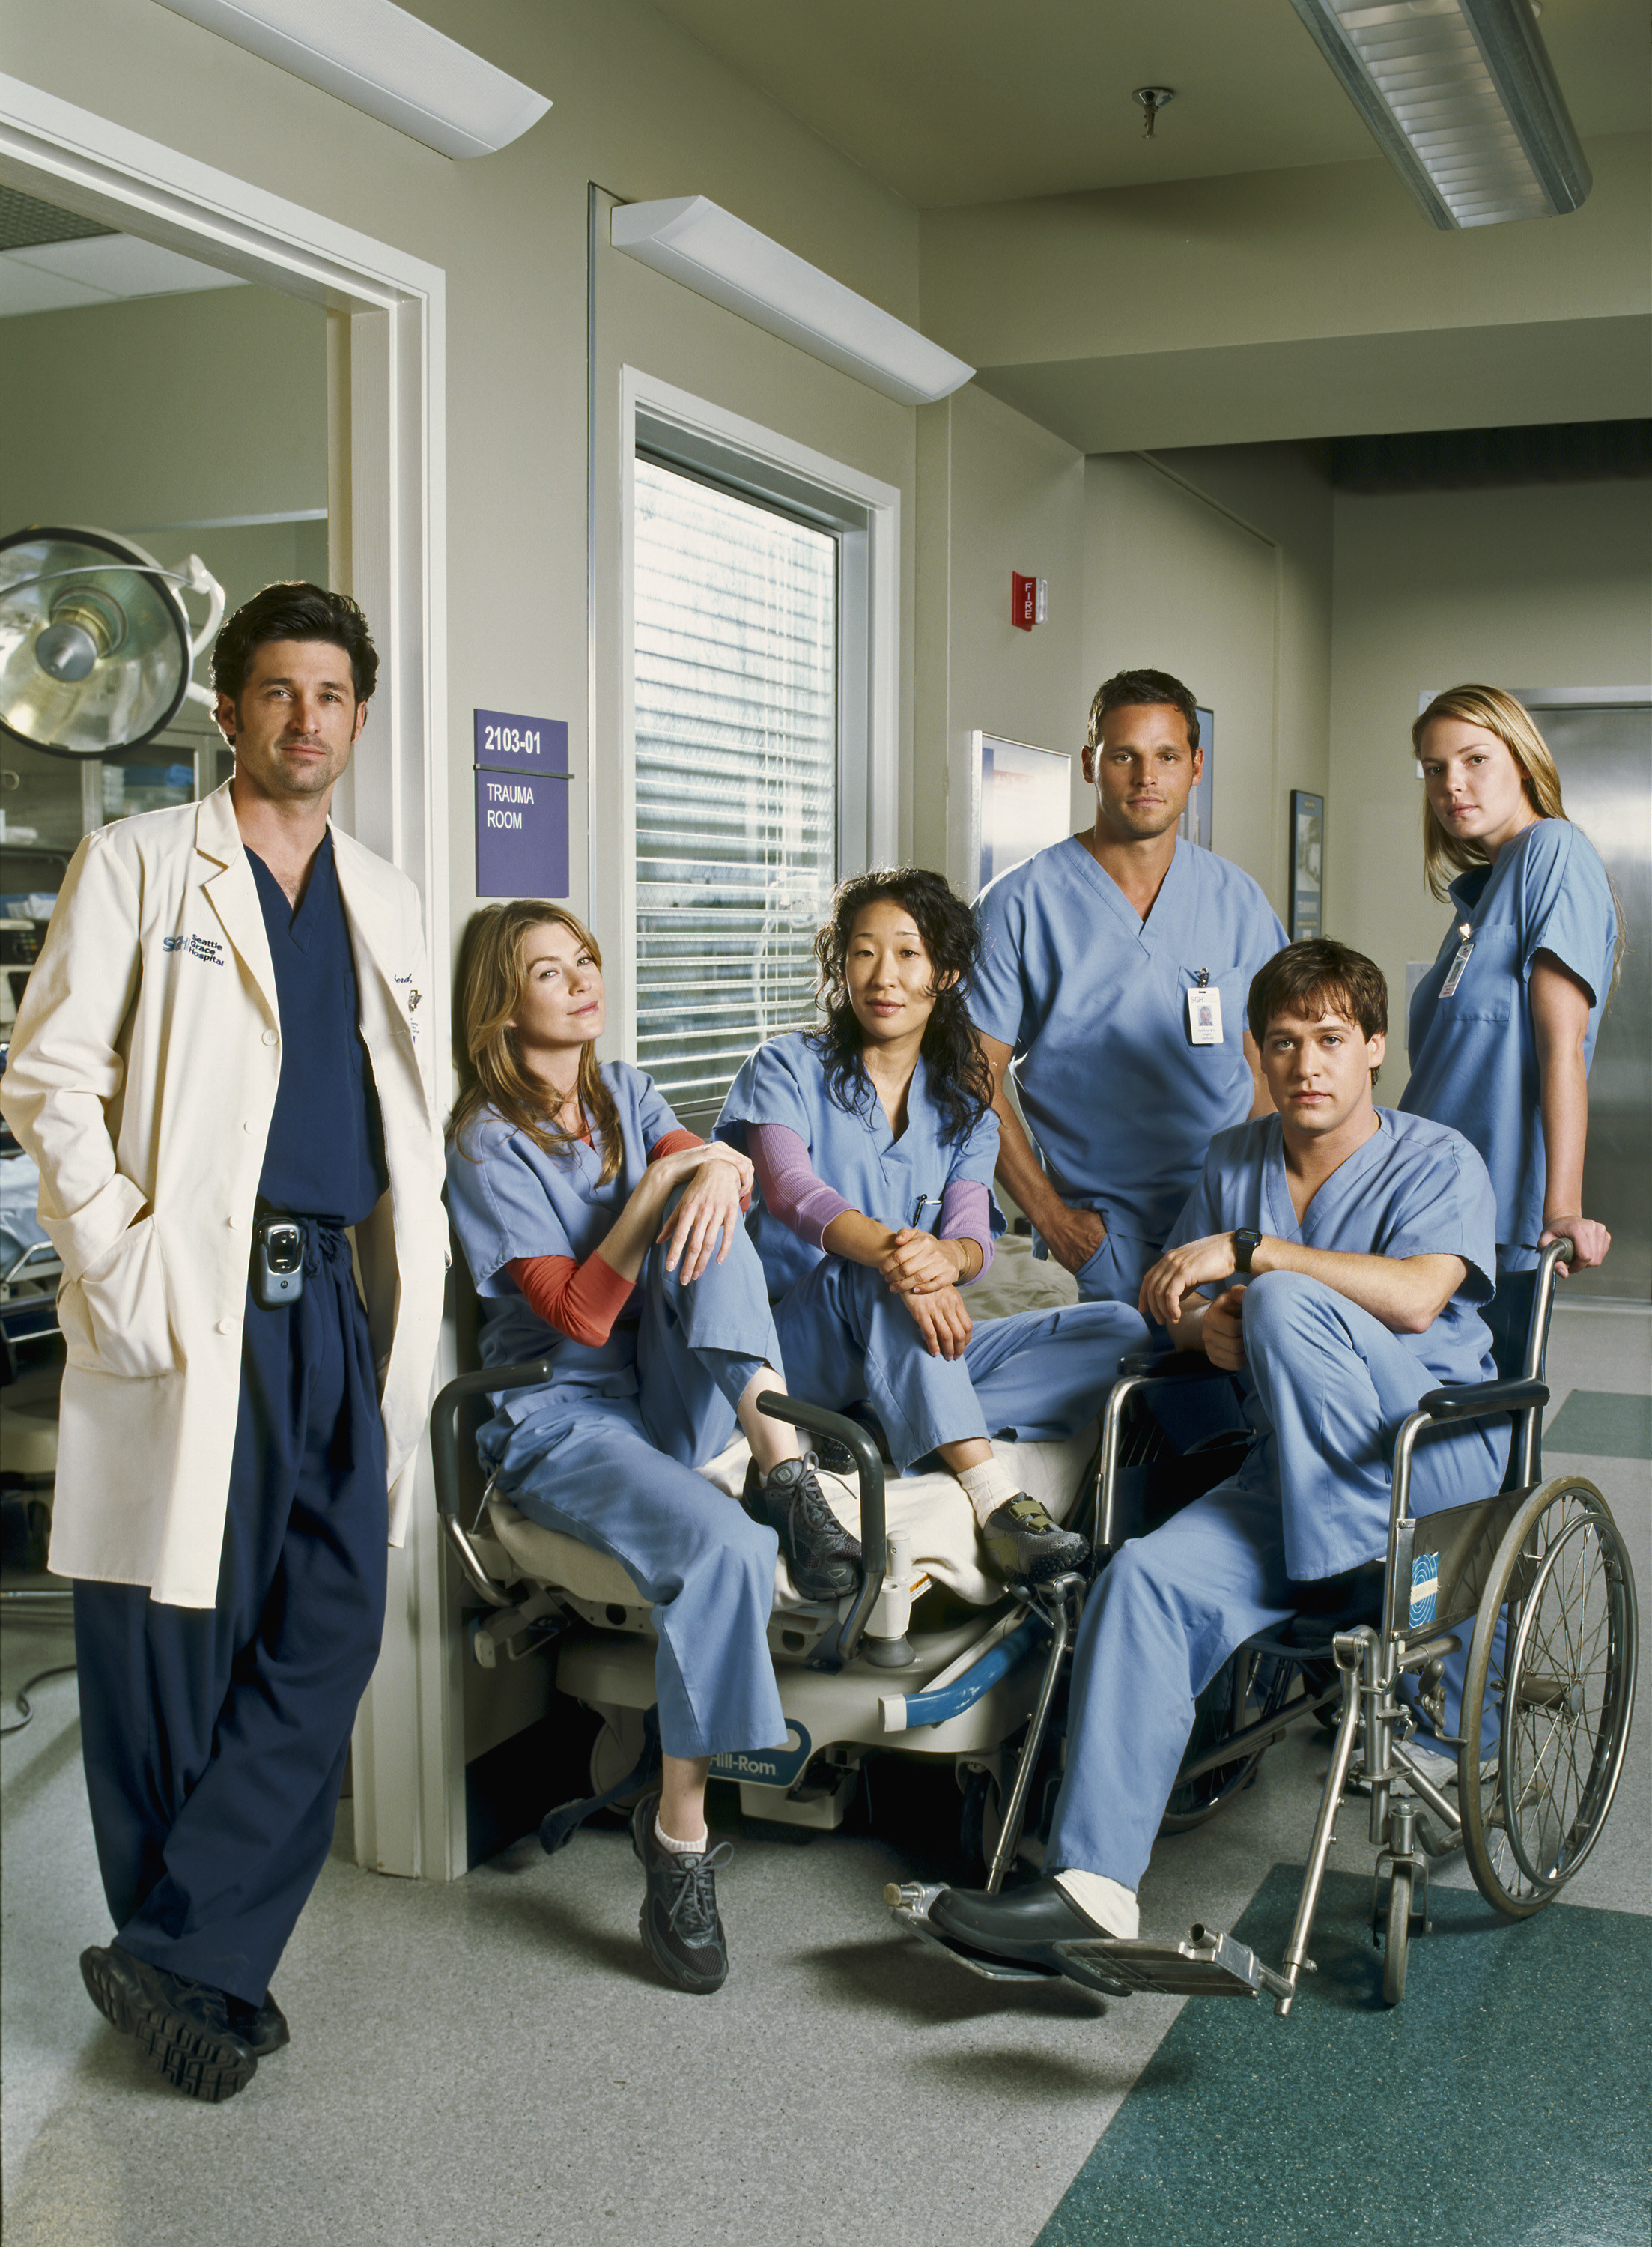 From left to right: Dr. Shepherd, Meredith, Christina Yang played by Sandra Oh, Alex Karev played by Justin Chambers, George O&#x27;Malley played by T.R. Knight, and Izzie Stevens played by Katherine Heigl